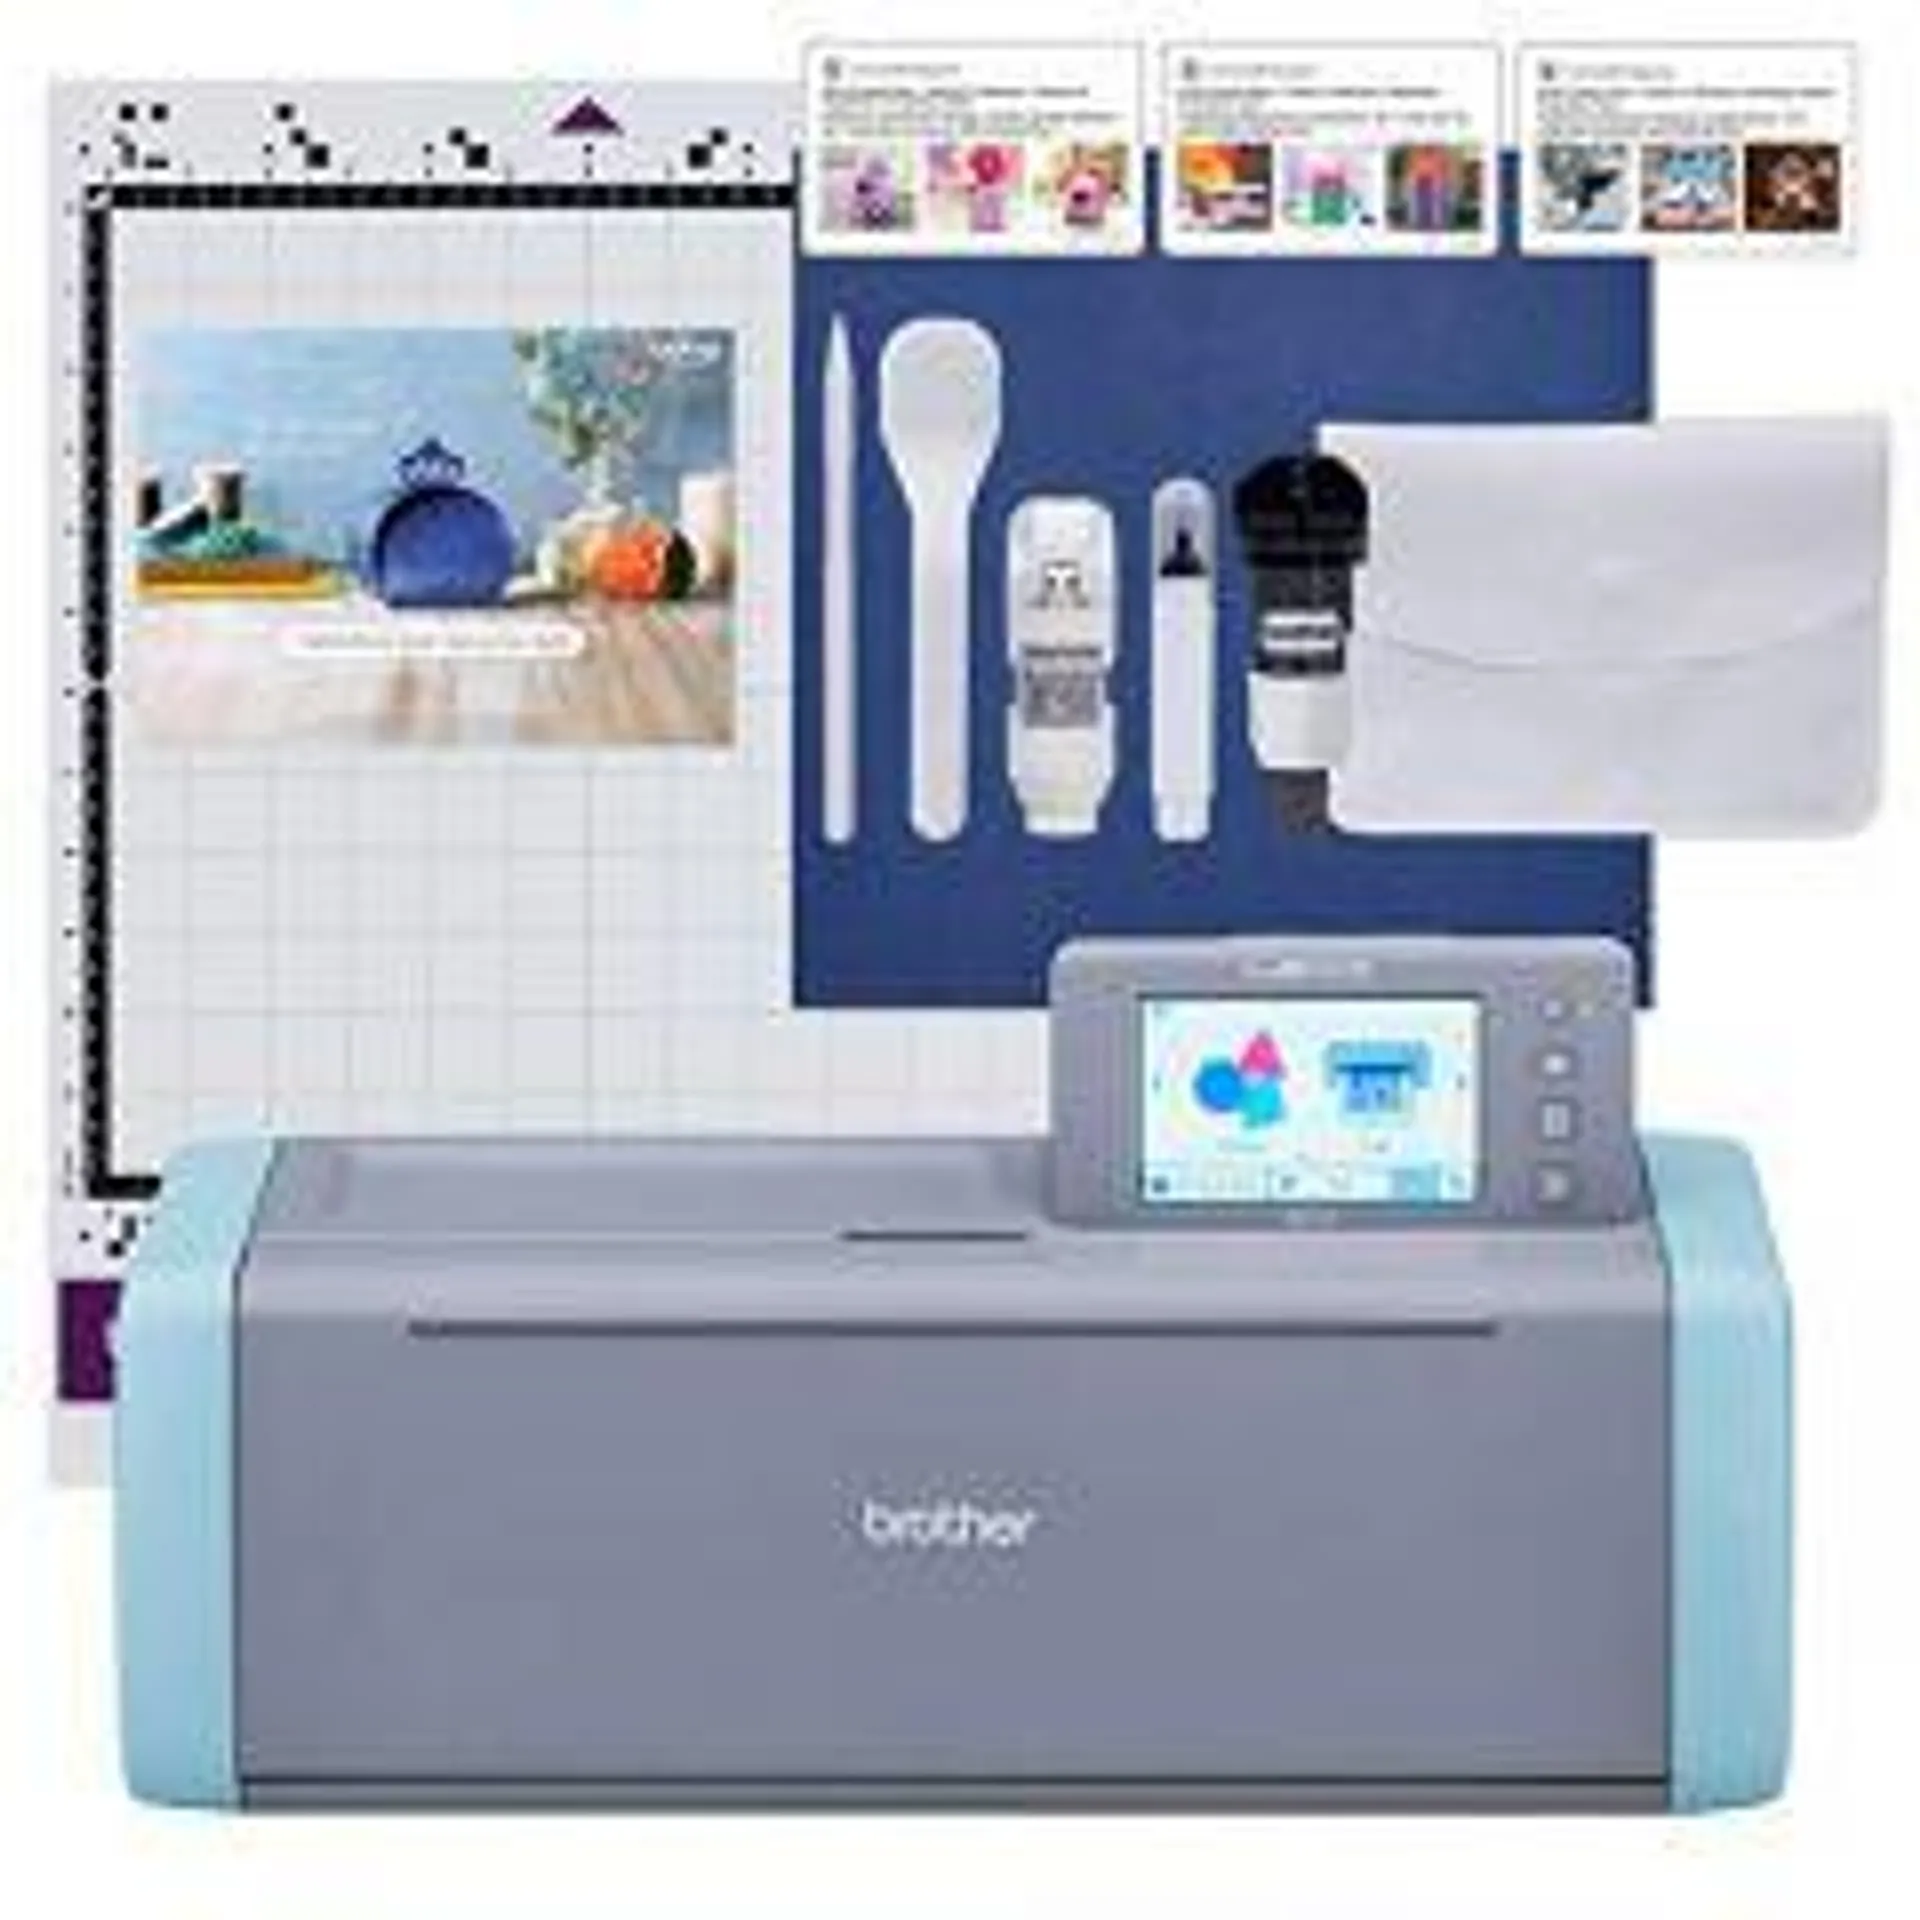 Brother SDX125 ScanNCut Electronic Cutting Machine with Built-in Scanner - Gray/Aqua